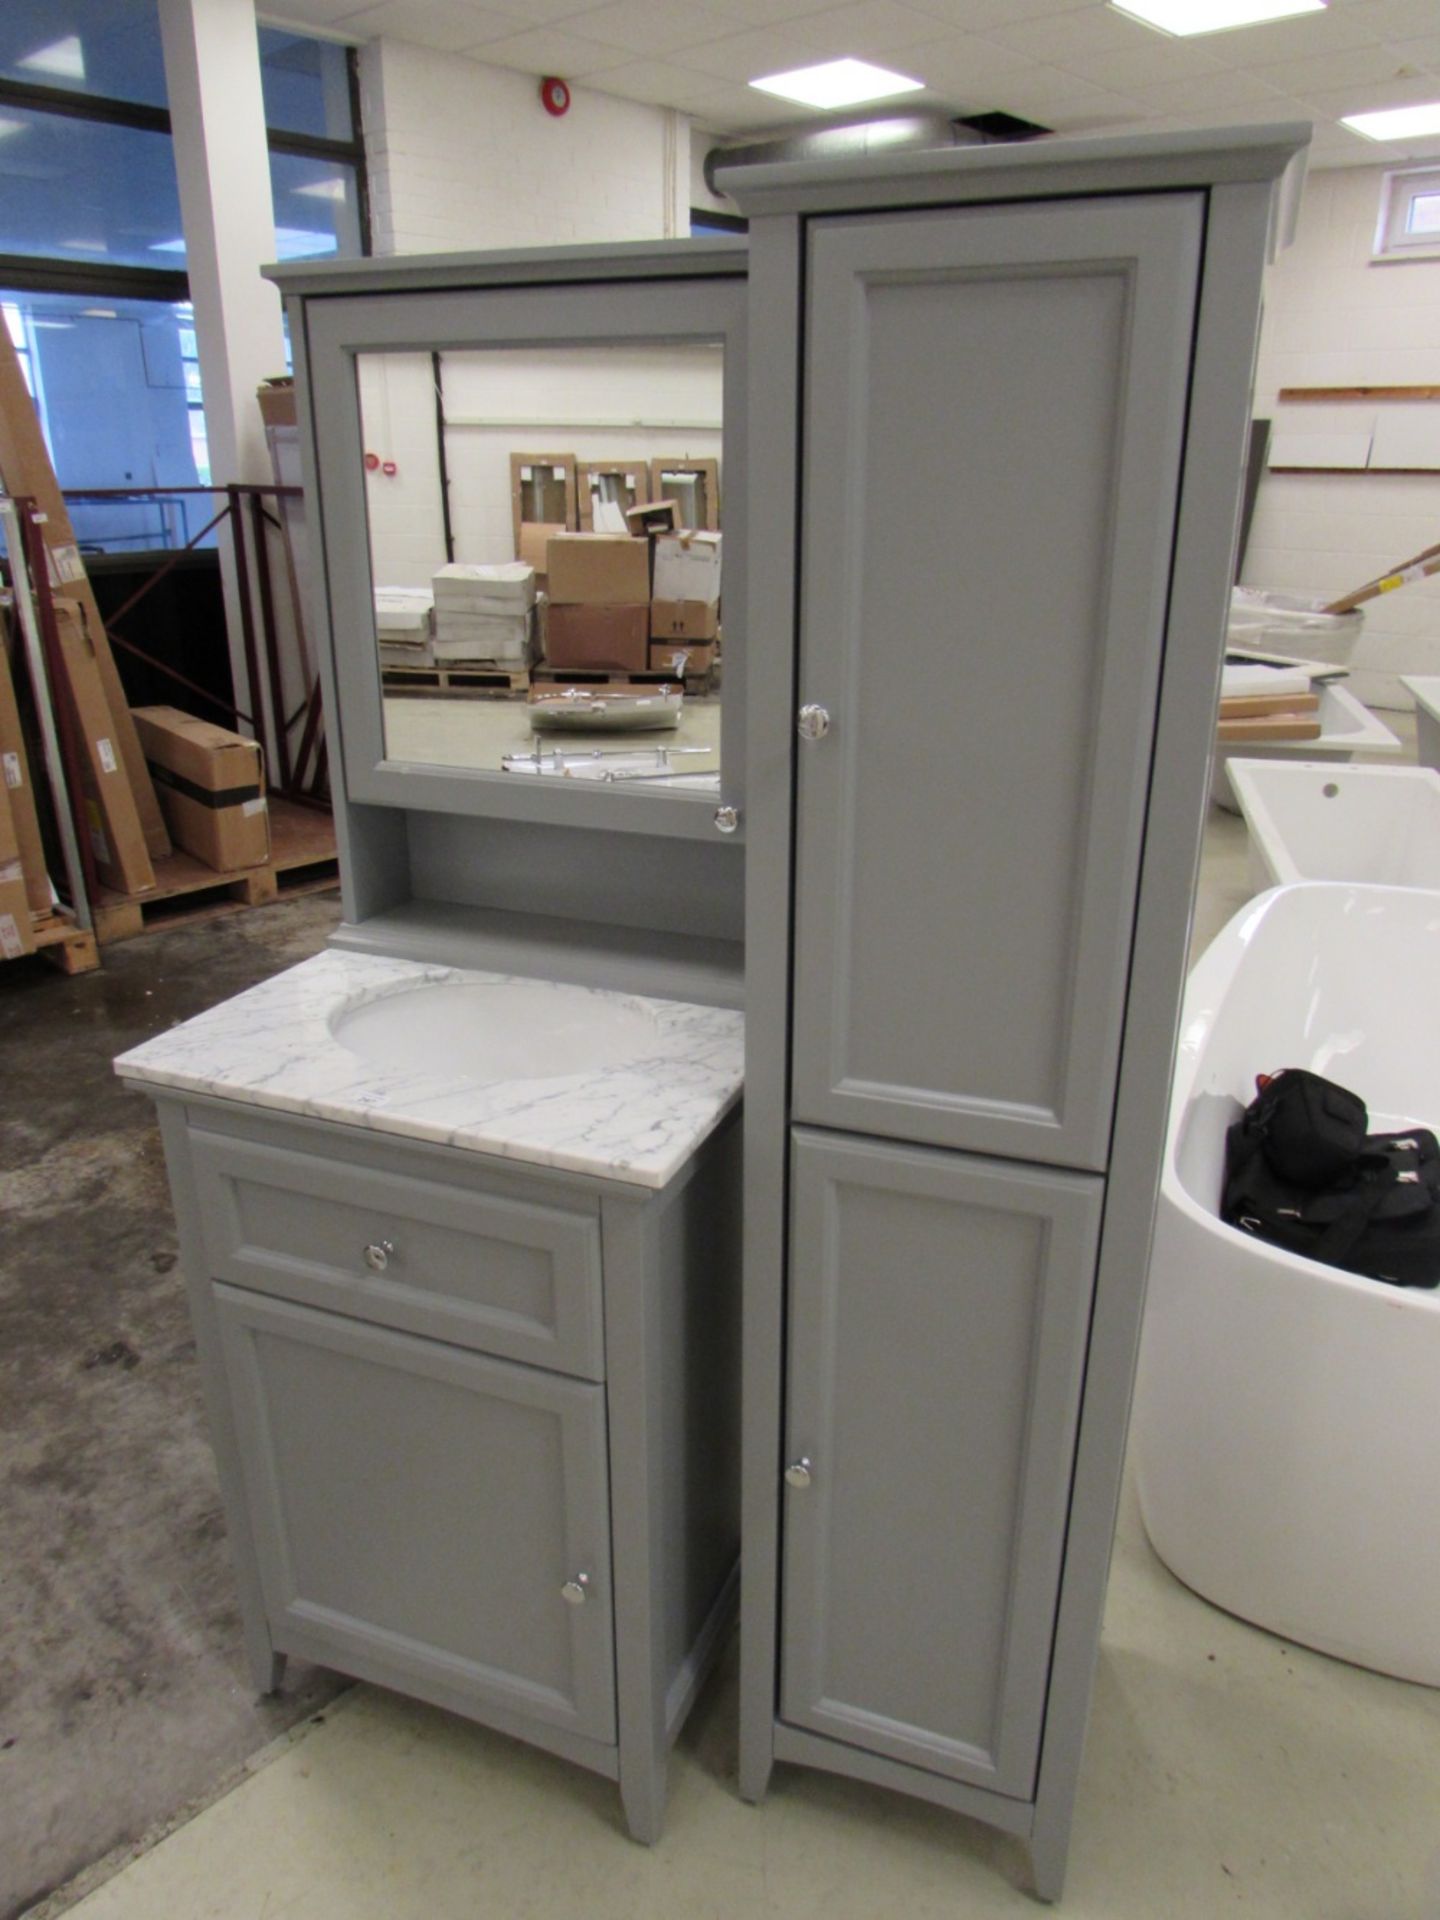 600wmm wide french style wash stand with marble basin and undermounted basin, 360mm wide tallstorage - Image 3 of 3